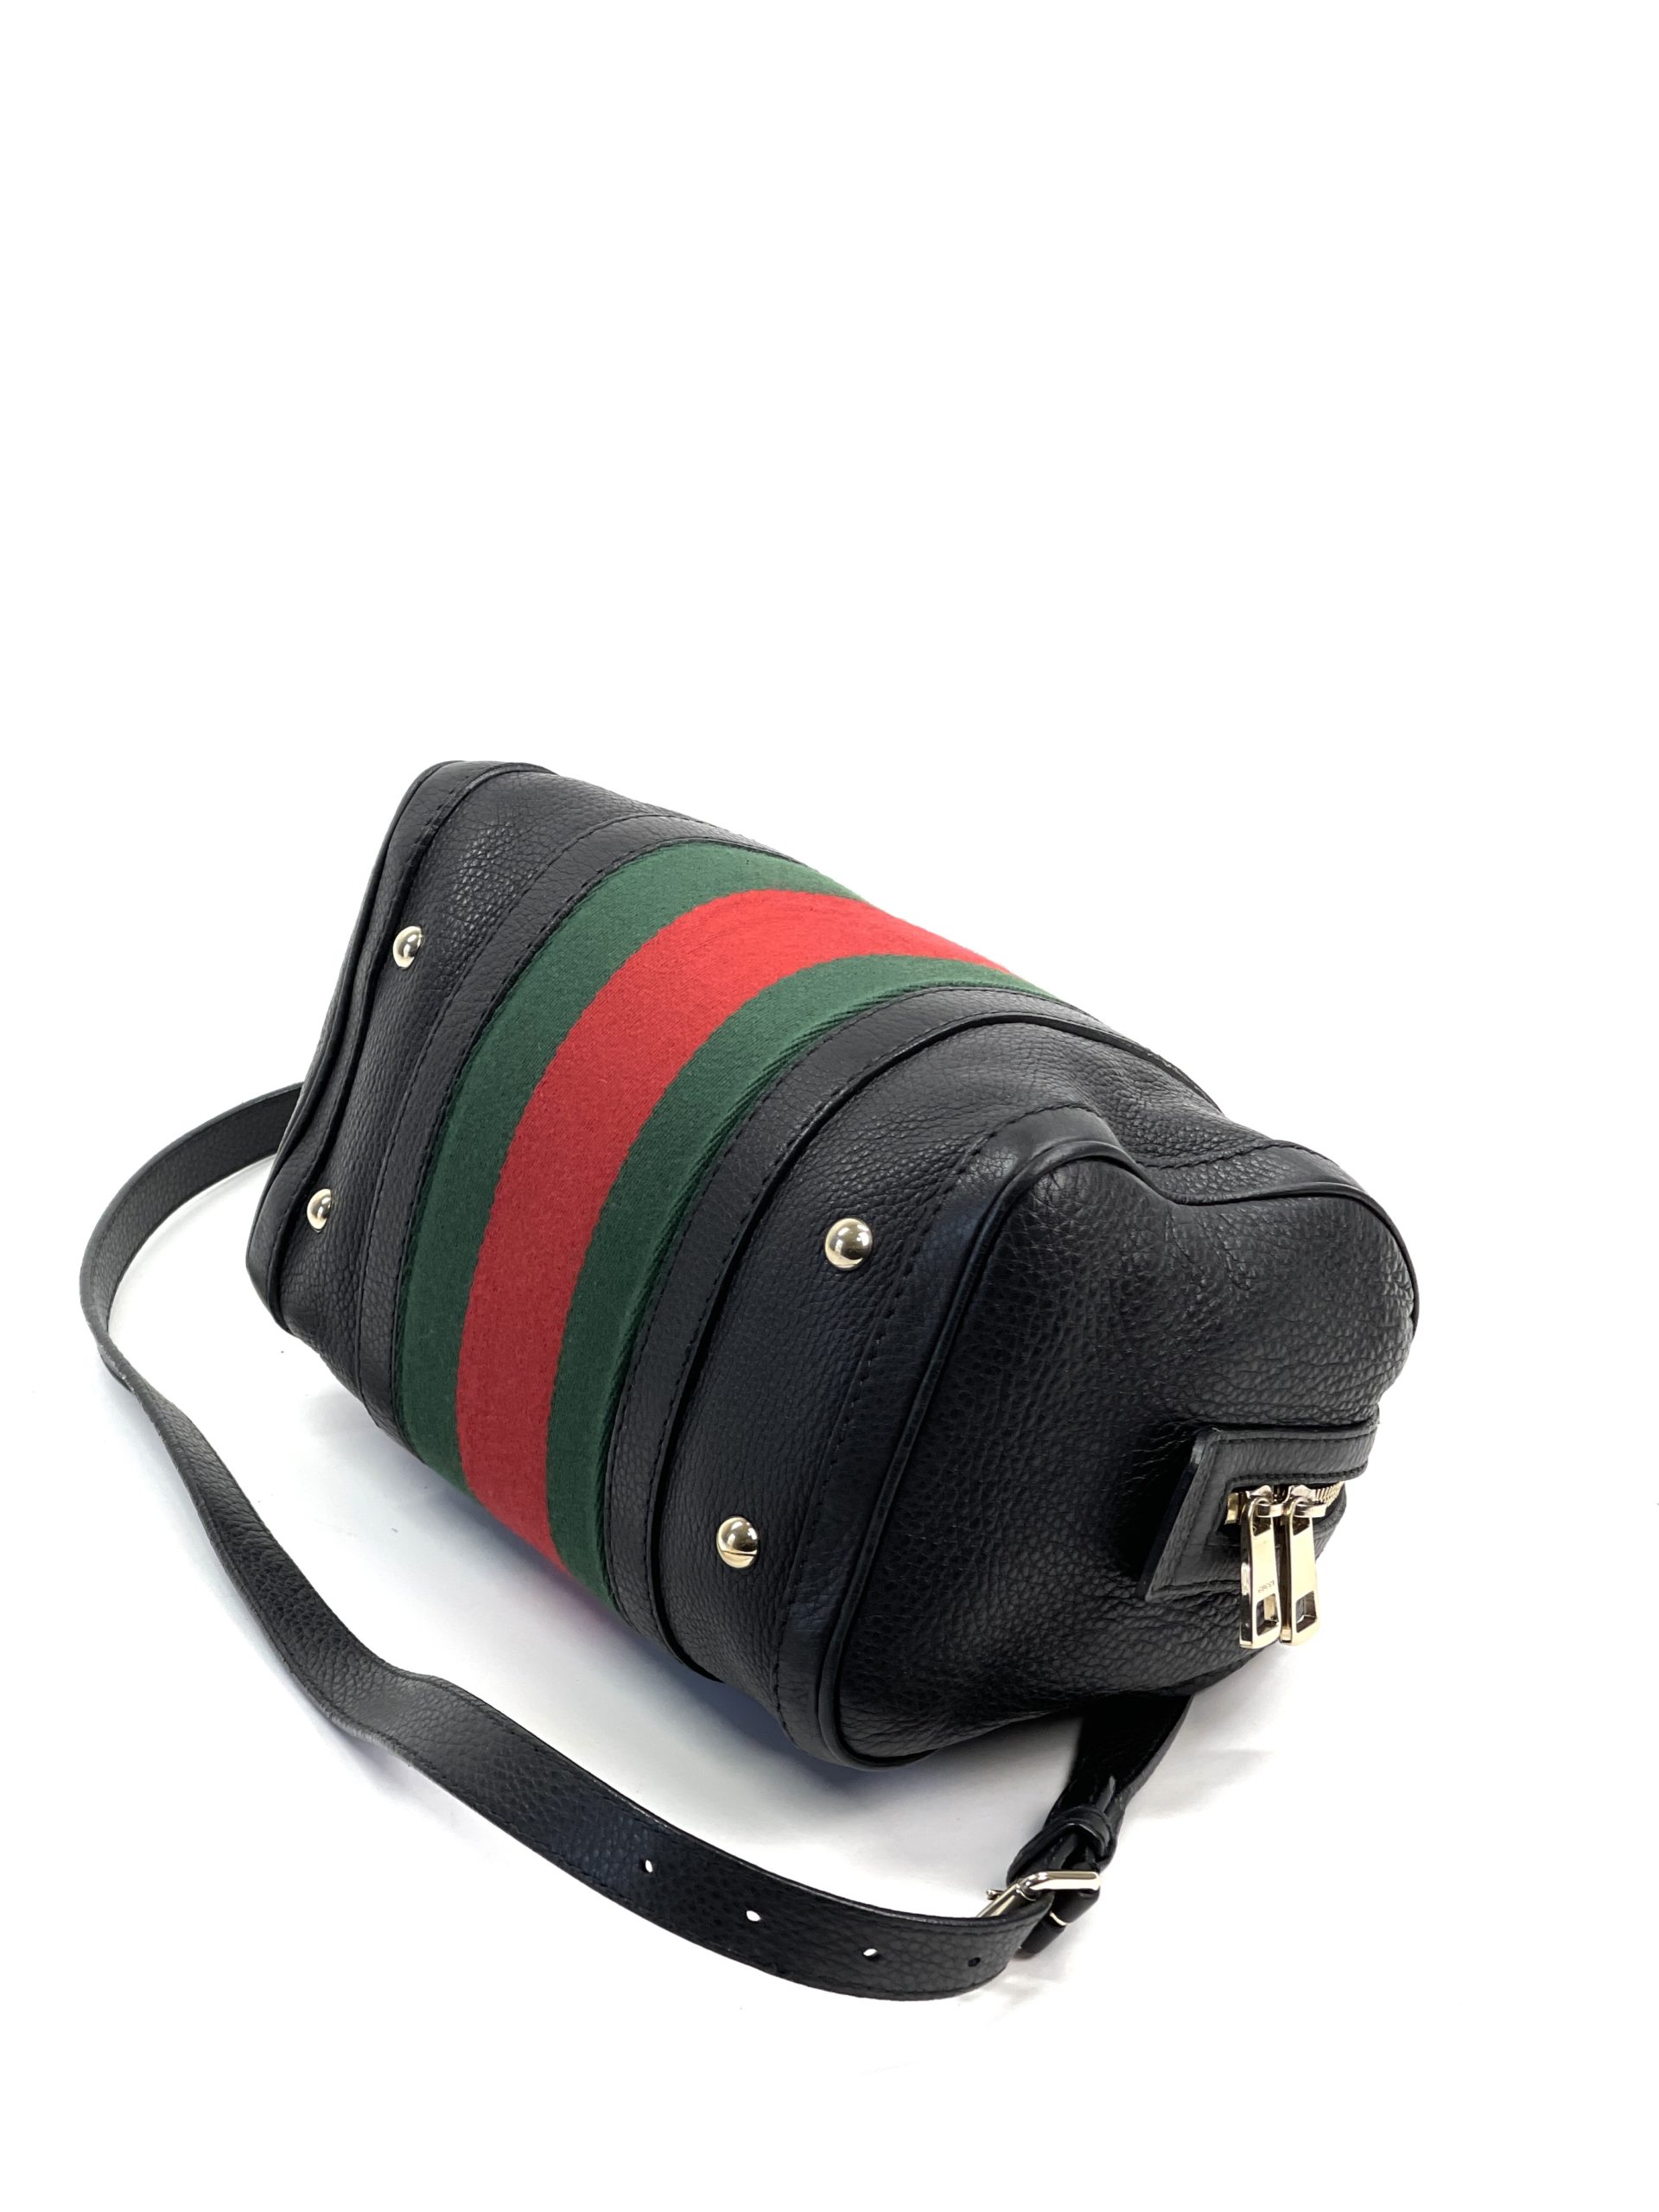 GUCCI LARGE BLACK LEATHER BOSTON BAG Price: R10 500 Click on the photo to  shop*